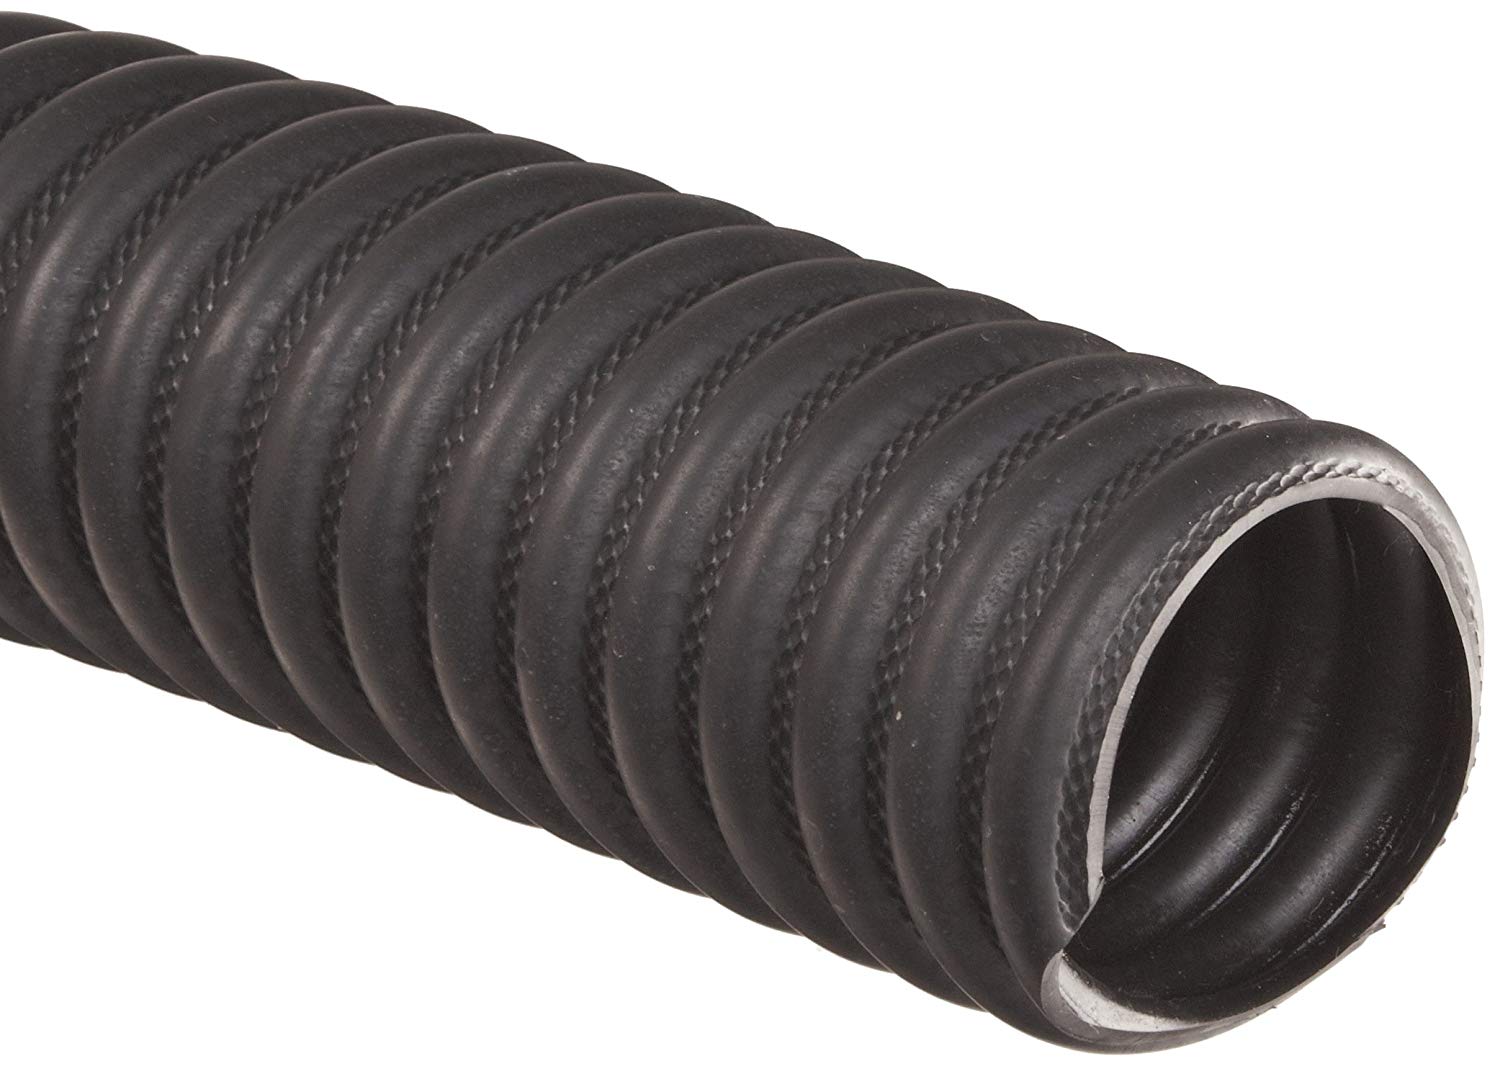 Garage Exhaust Flare-Lok Rubber Duct Hose. Black. 4" ID. 11' Length - MPR Tools & Equipment